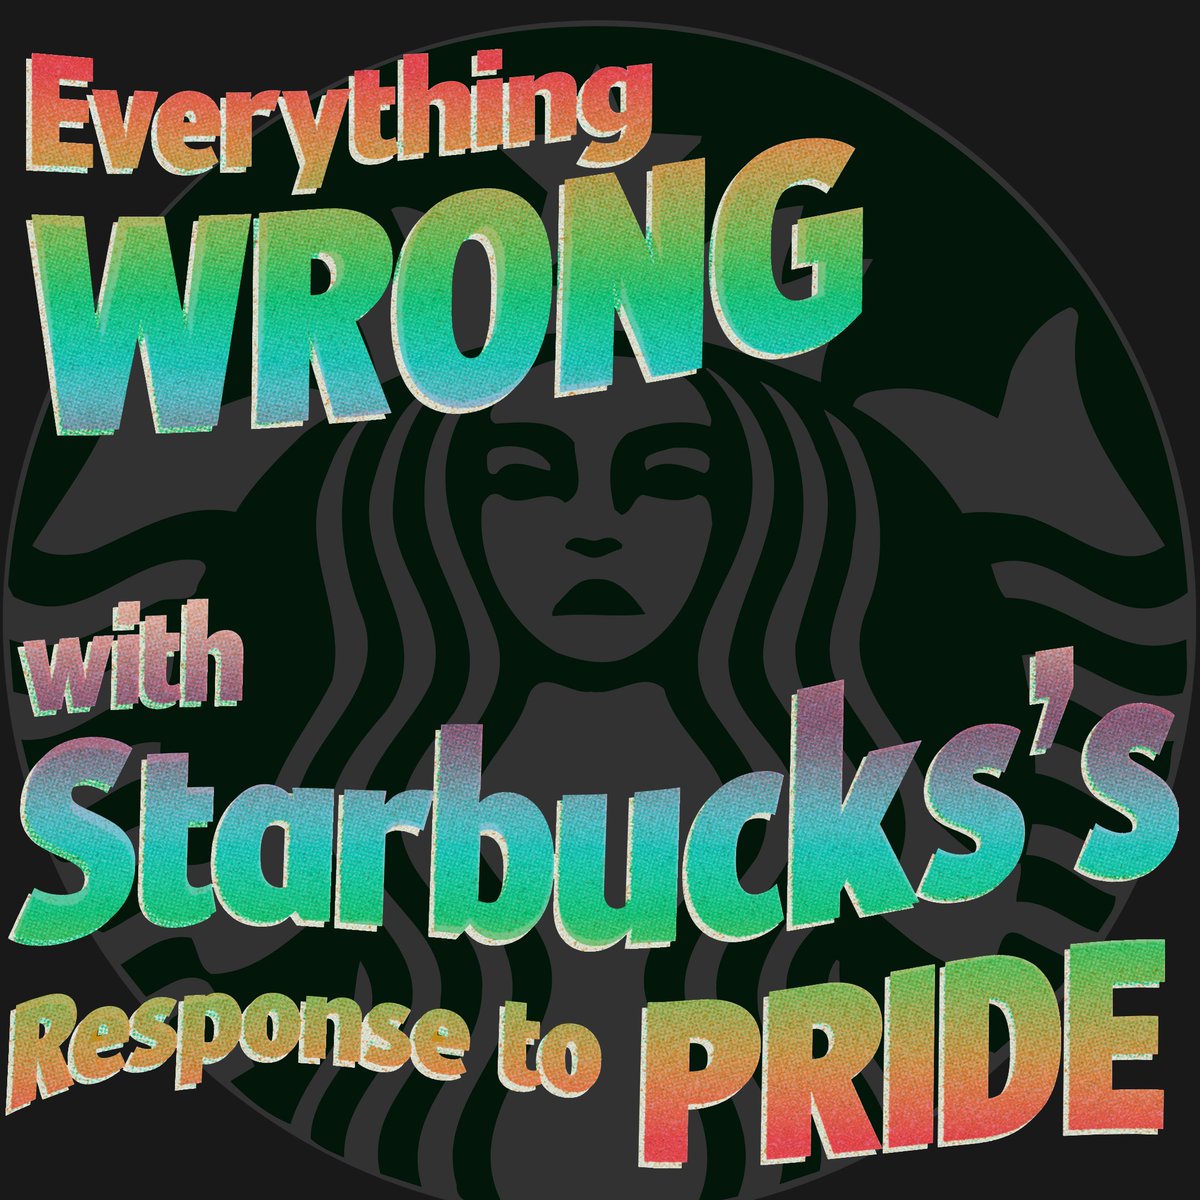 Last week, news of Starbucks banning Pride decorations in many stores exploded online.

Starbucks claims that pride decorations haven't been banned - but according to internal documents and store manager testimonies, their own responses have not been consistent. 🧵1/4